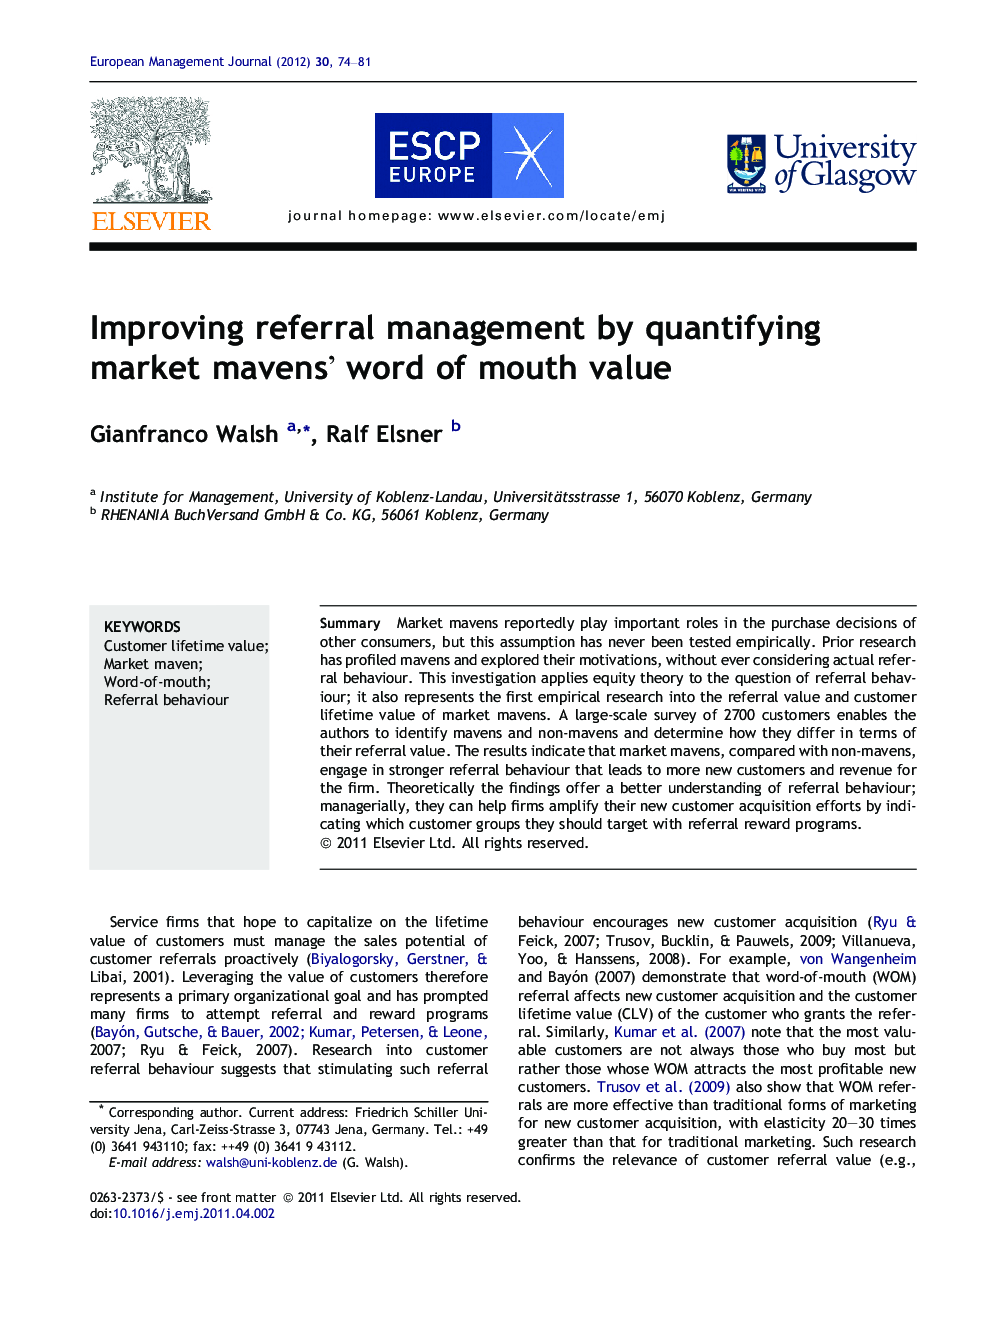 Improving referral management by quantifying market mavens’ word of mouth value